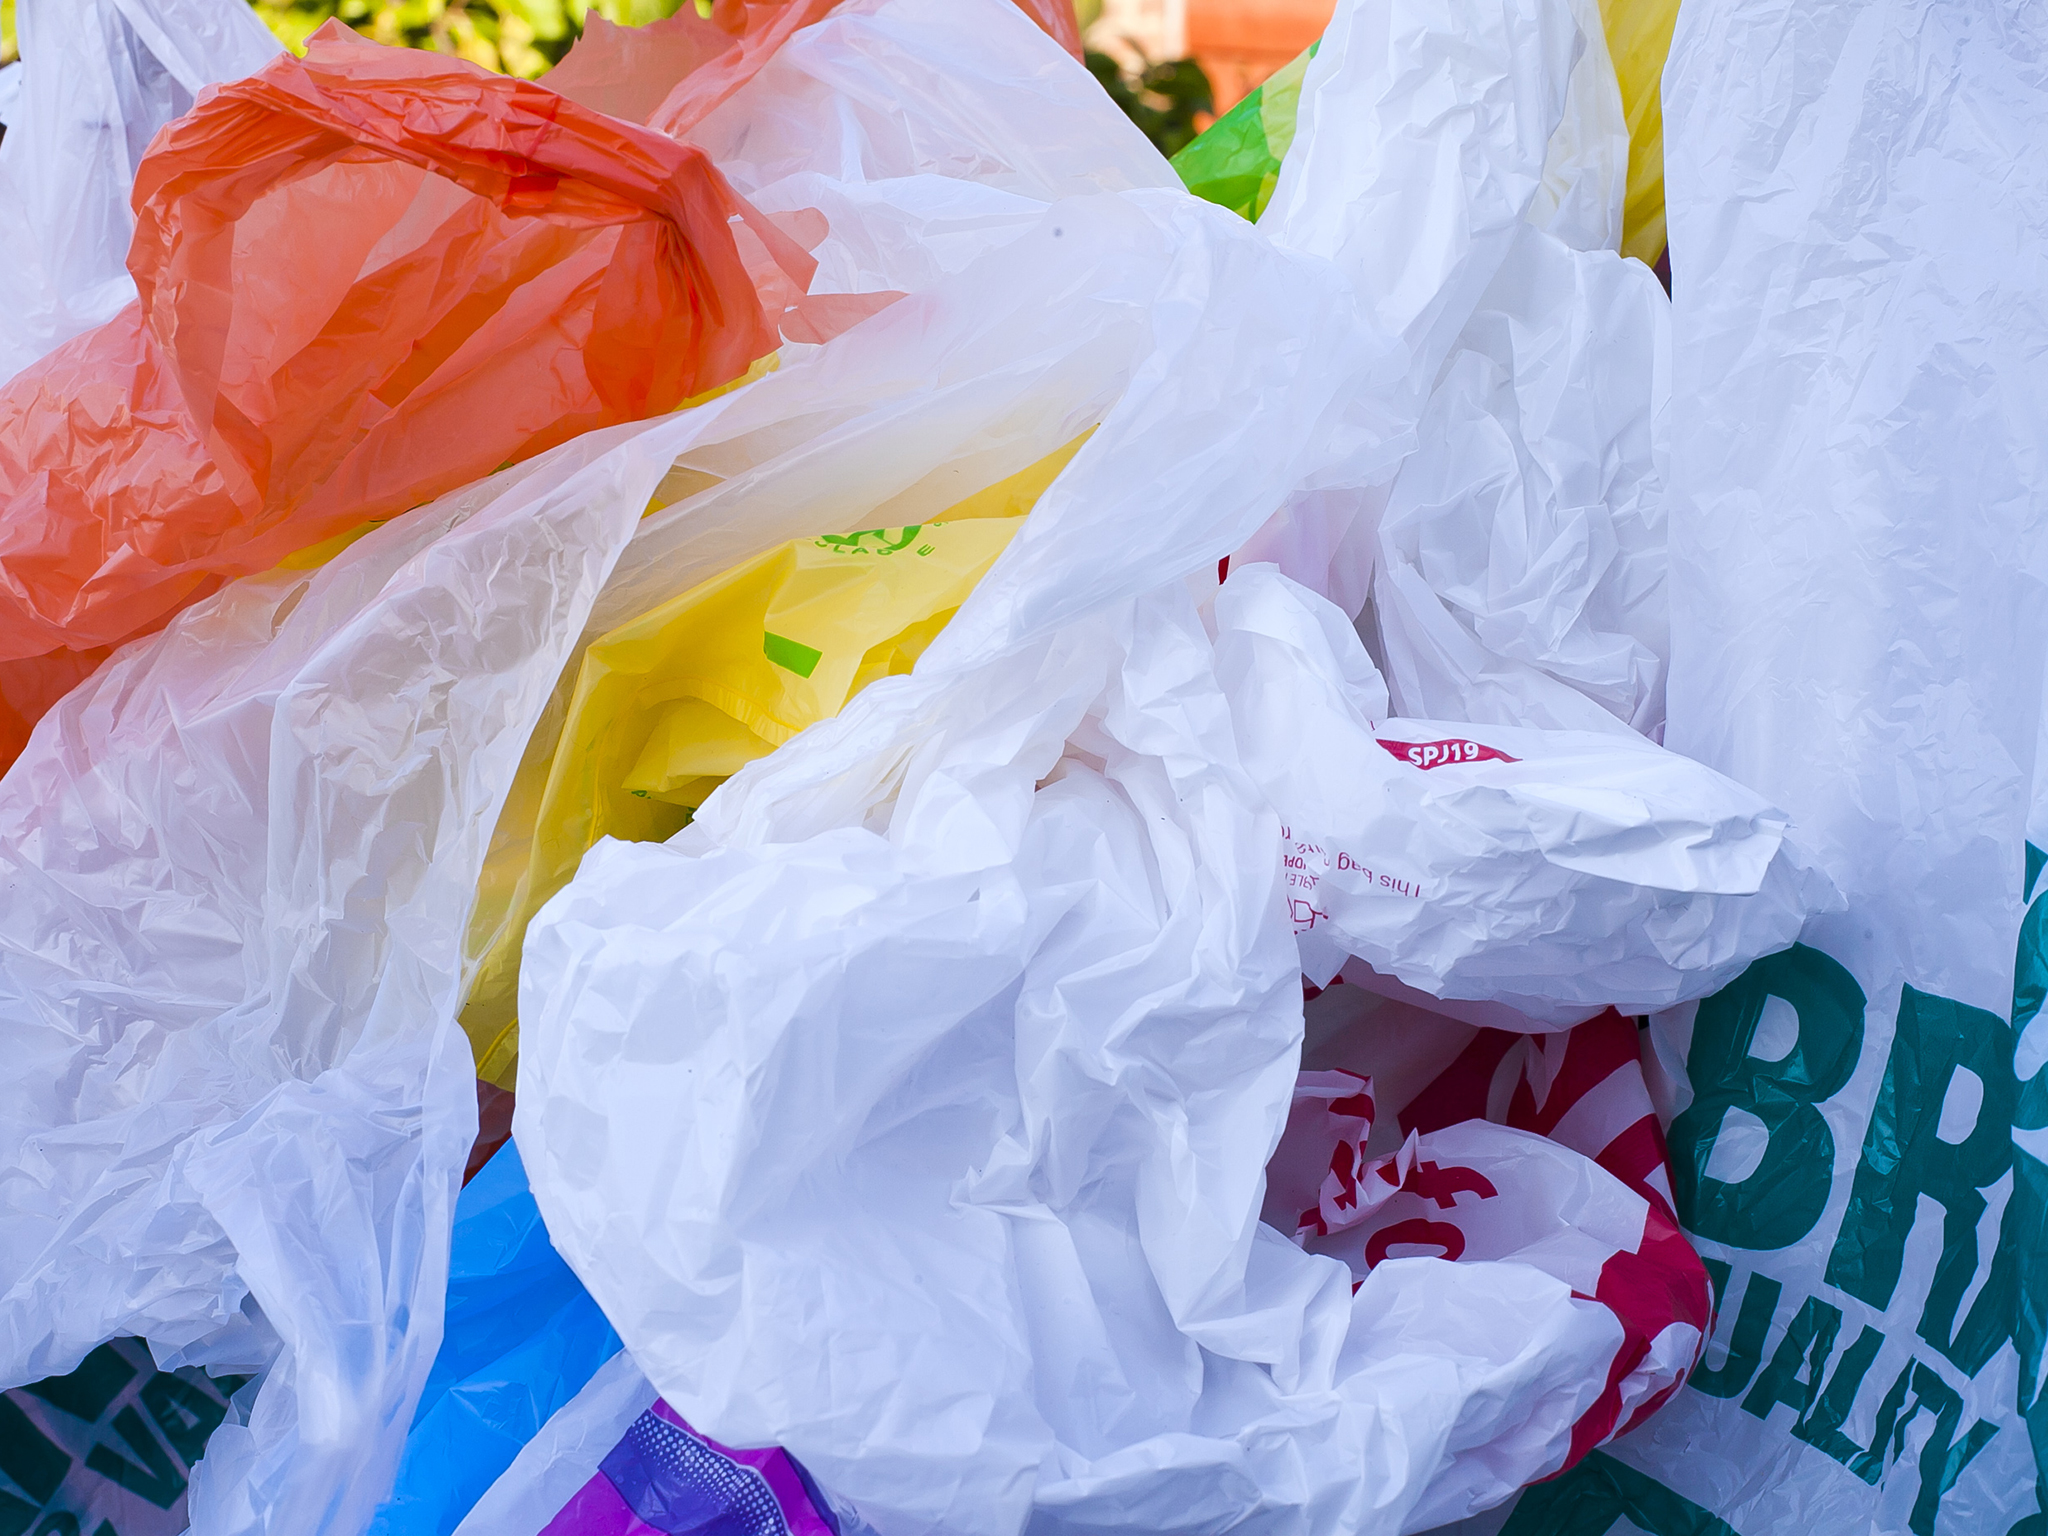 Get Ready, New York: The Plastic Bag Ban Is Starting - The New York Times